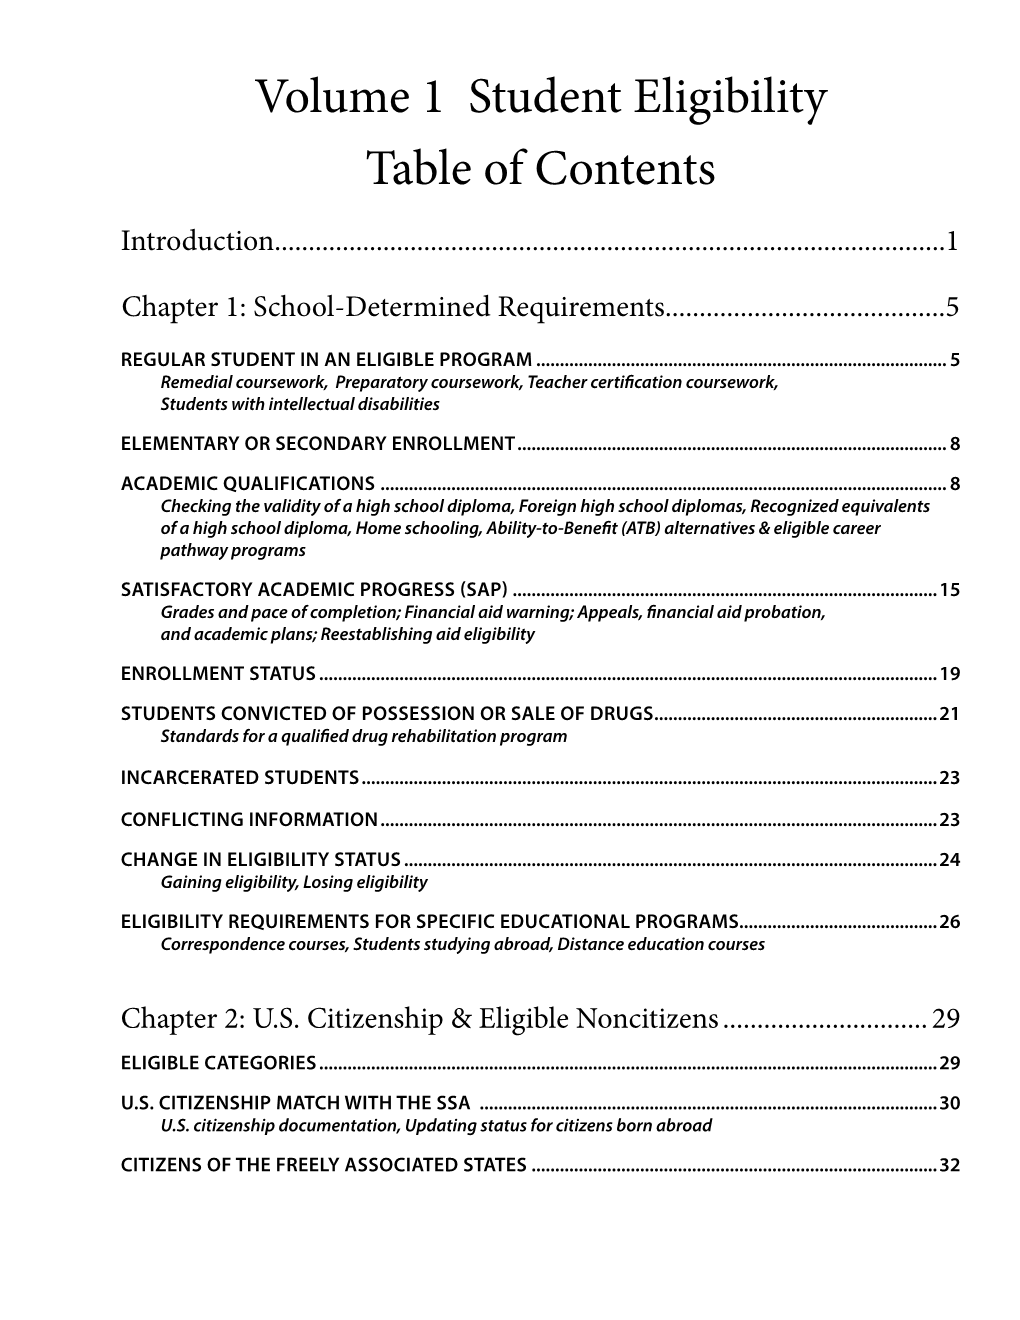 Volume 1 Student Eligibility Table of Contents Introduction